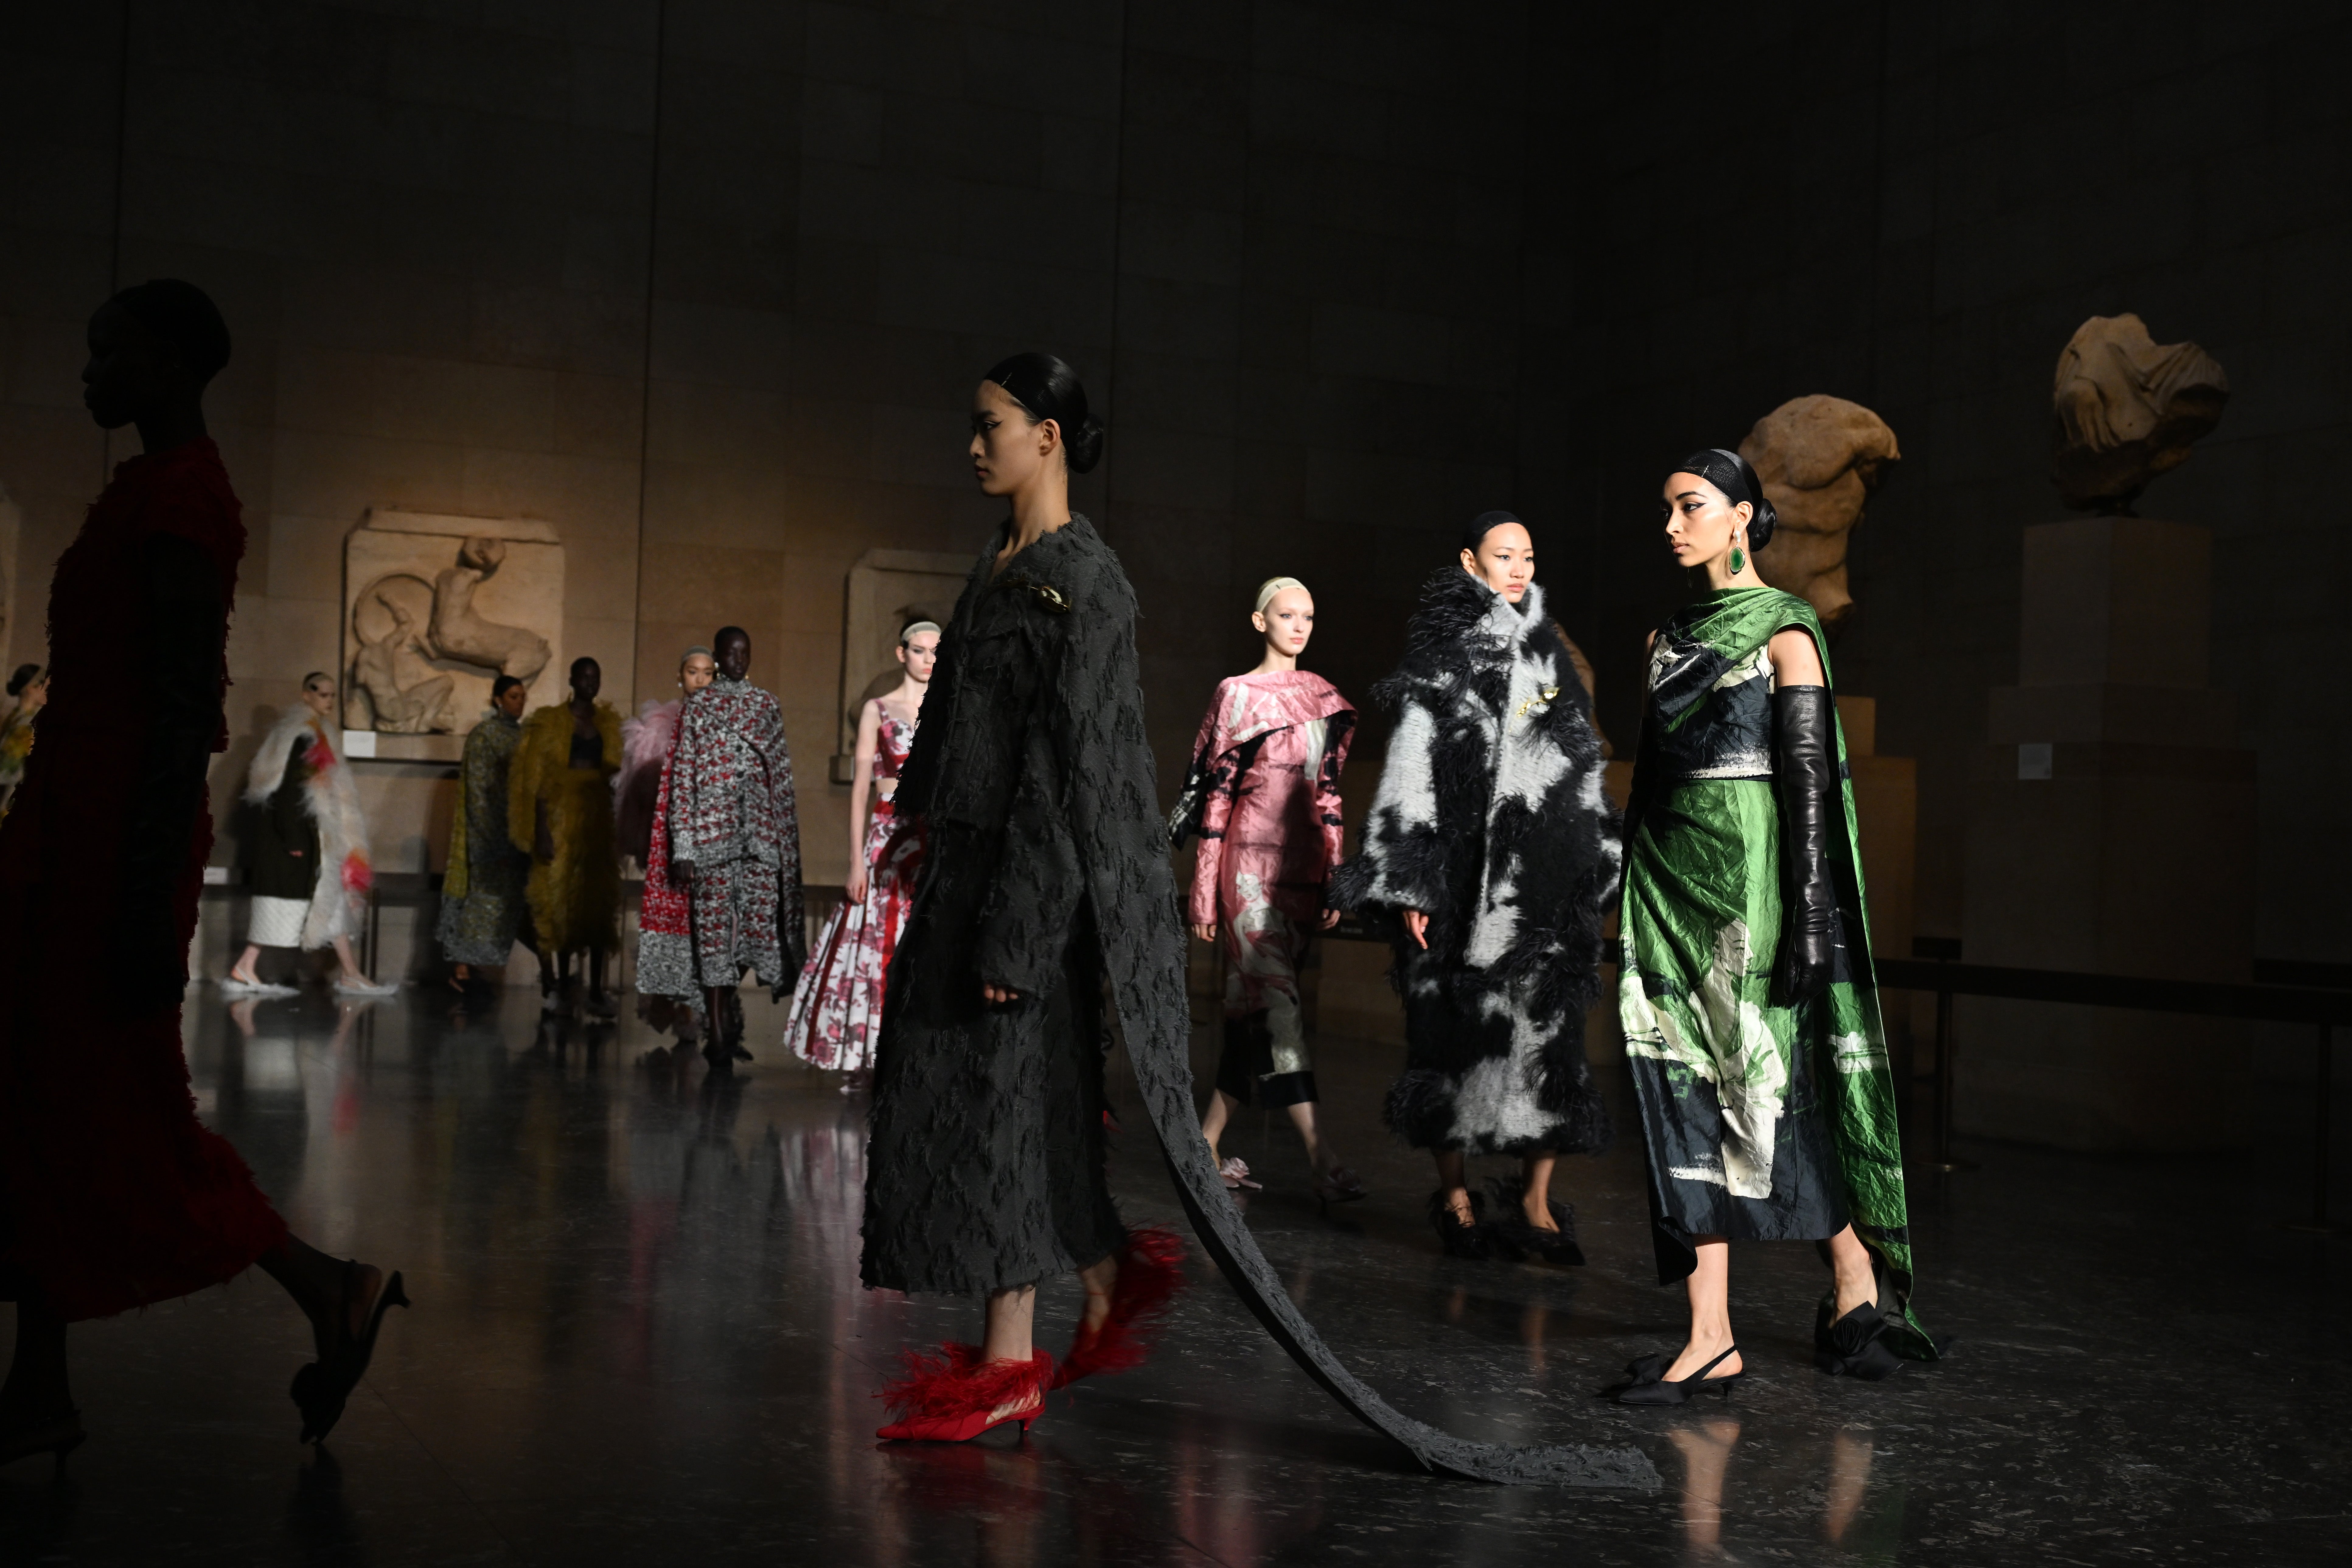 Models walk the runway in the finale at the ERDEM show during London Fashion Week